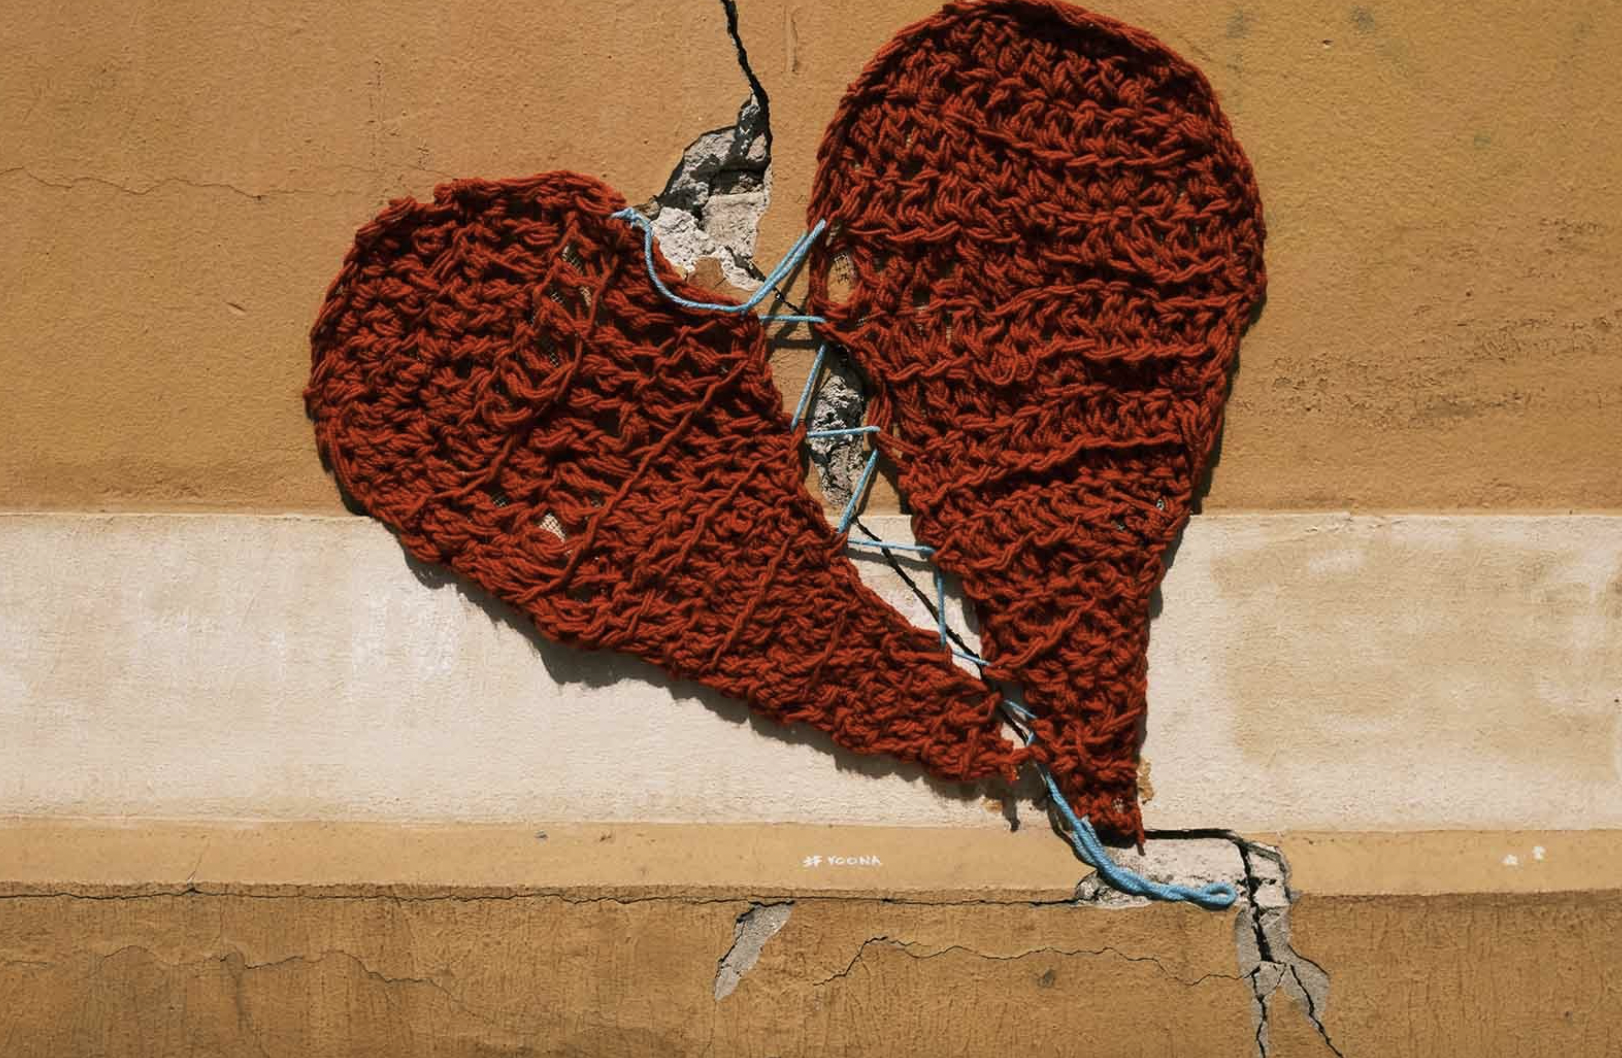 Heart sewn together